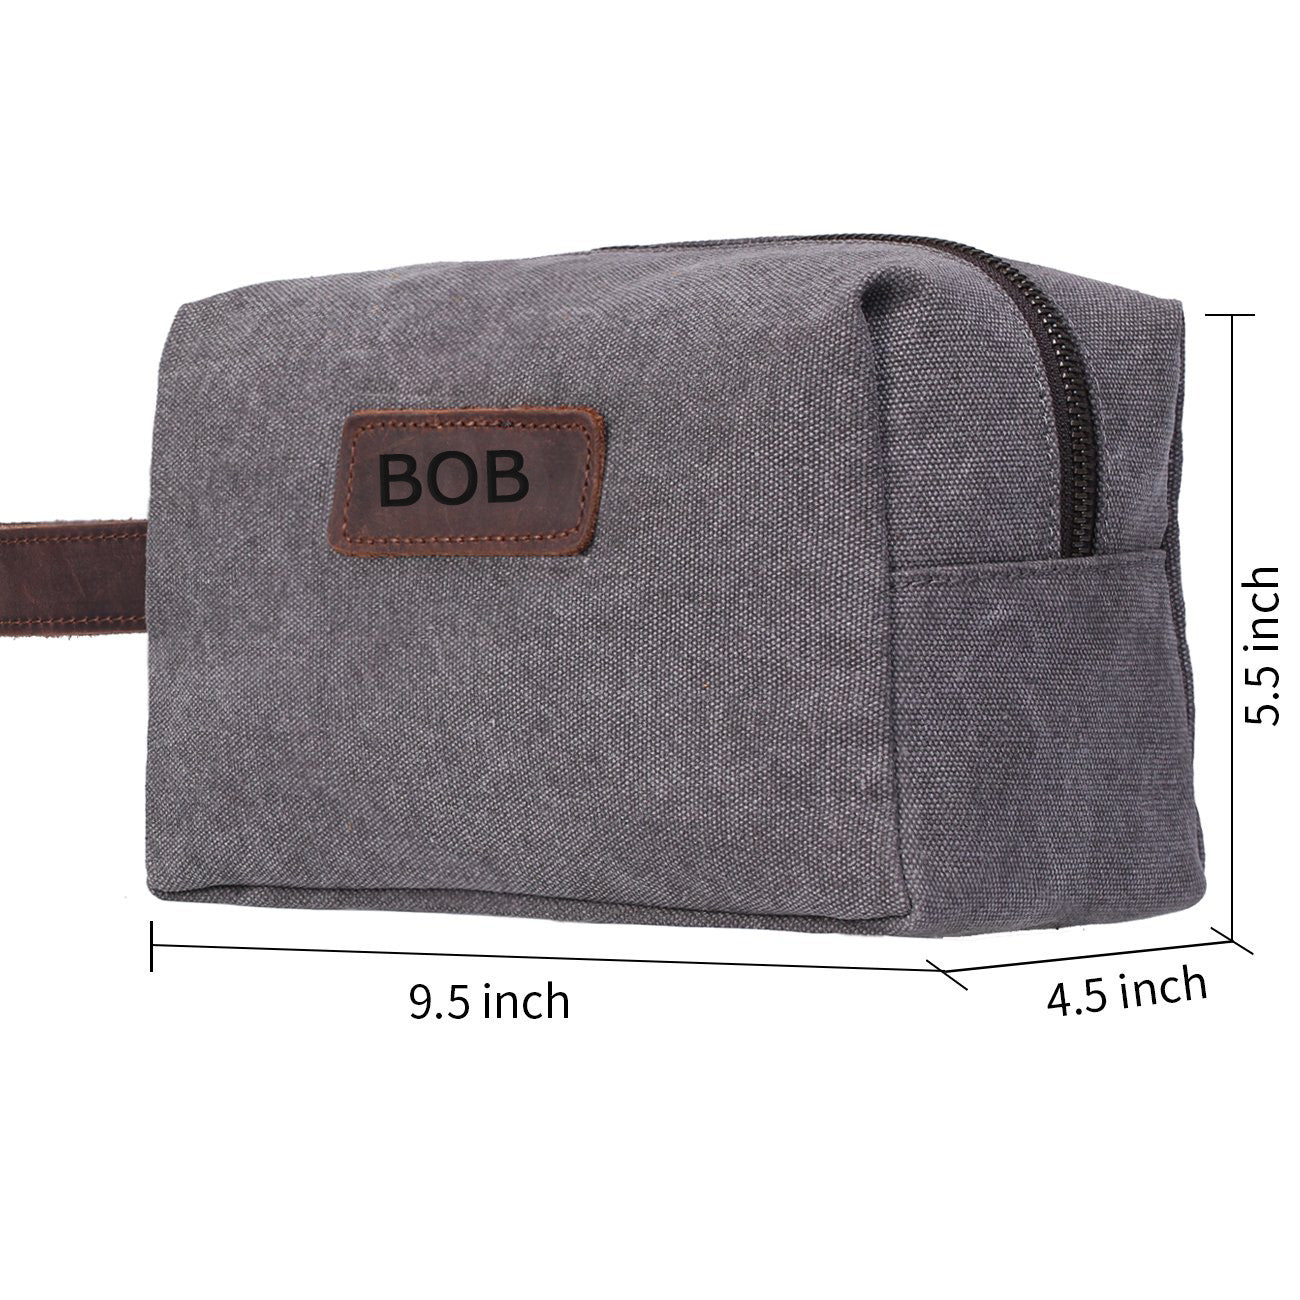 Toiletry Bag for Men Women Waterproof Portable Shaving Dopp Kit Cosmetic Makeup Organizer Pouch Bag Travel Accessories Bag - icambag